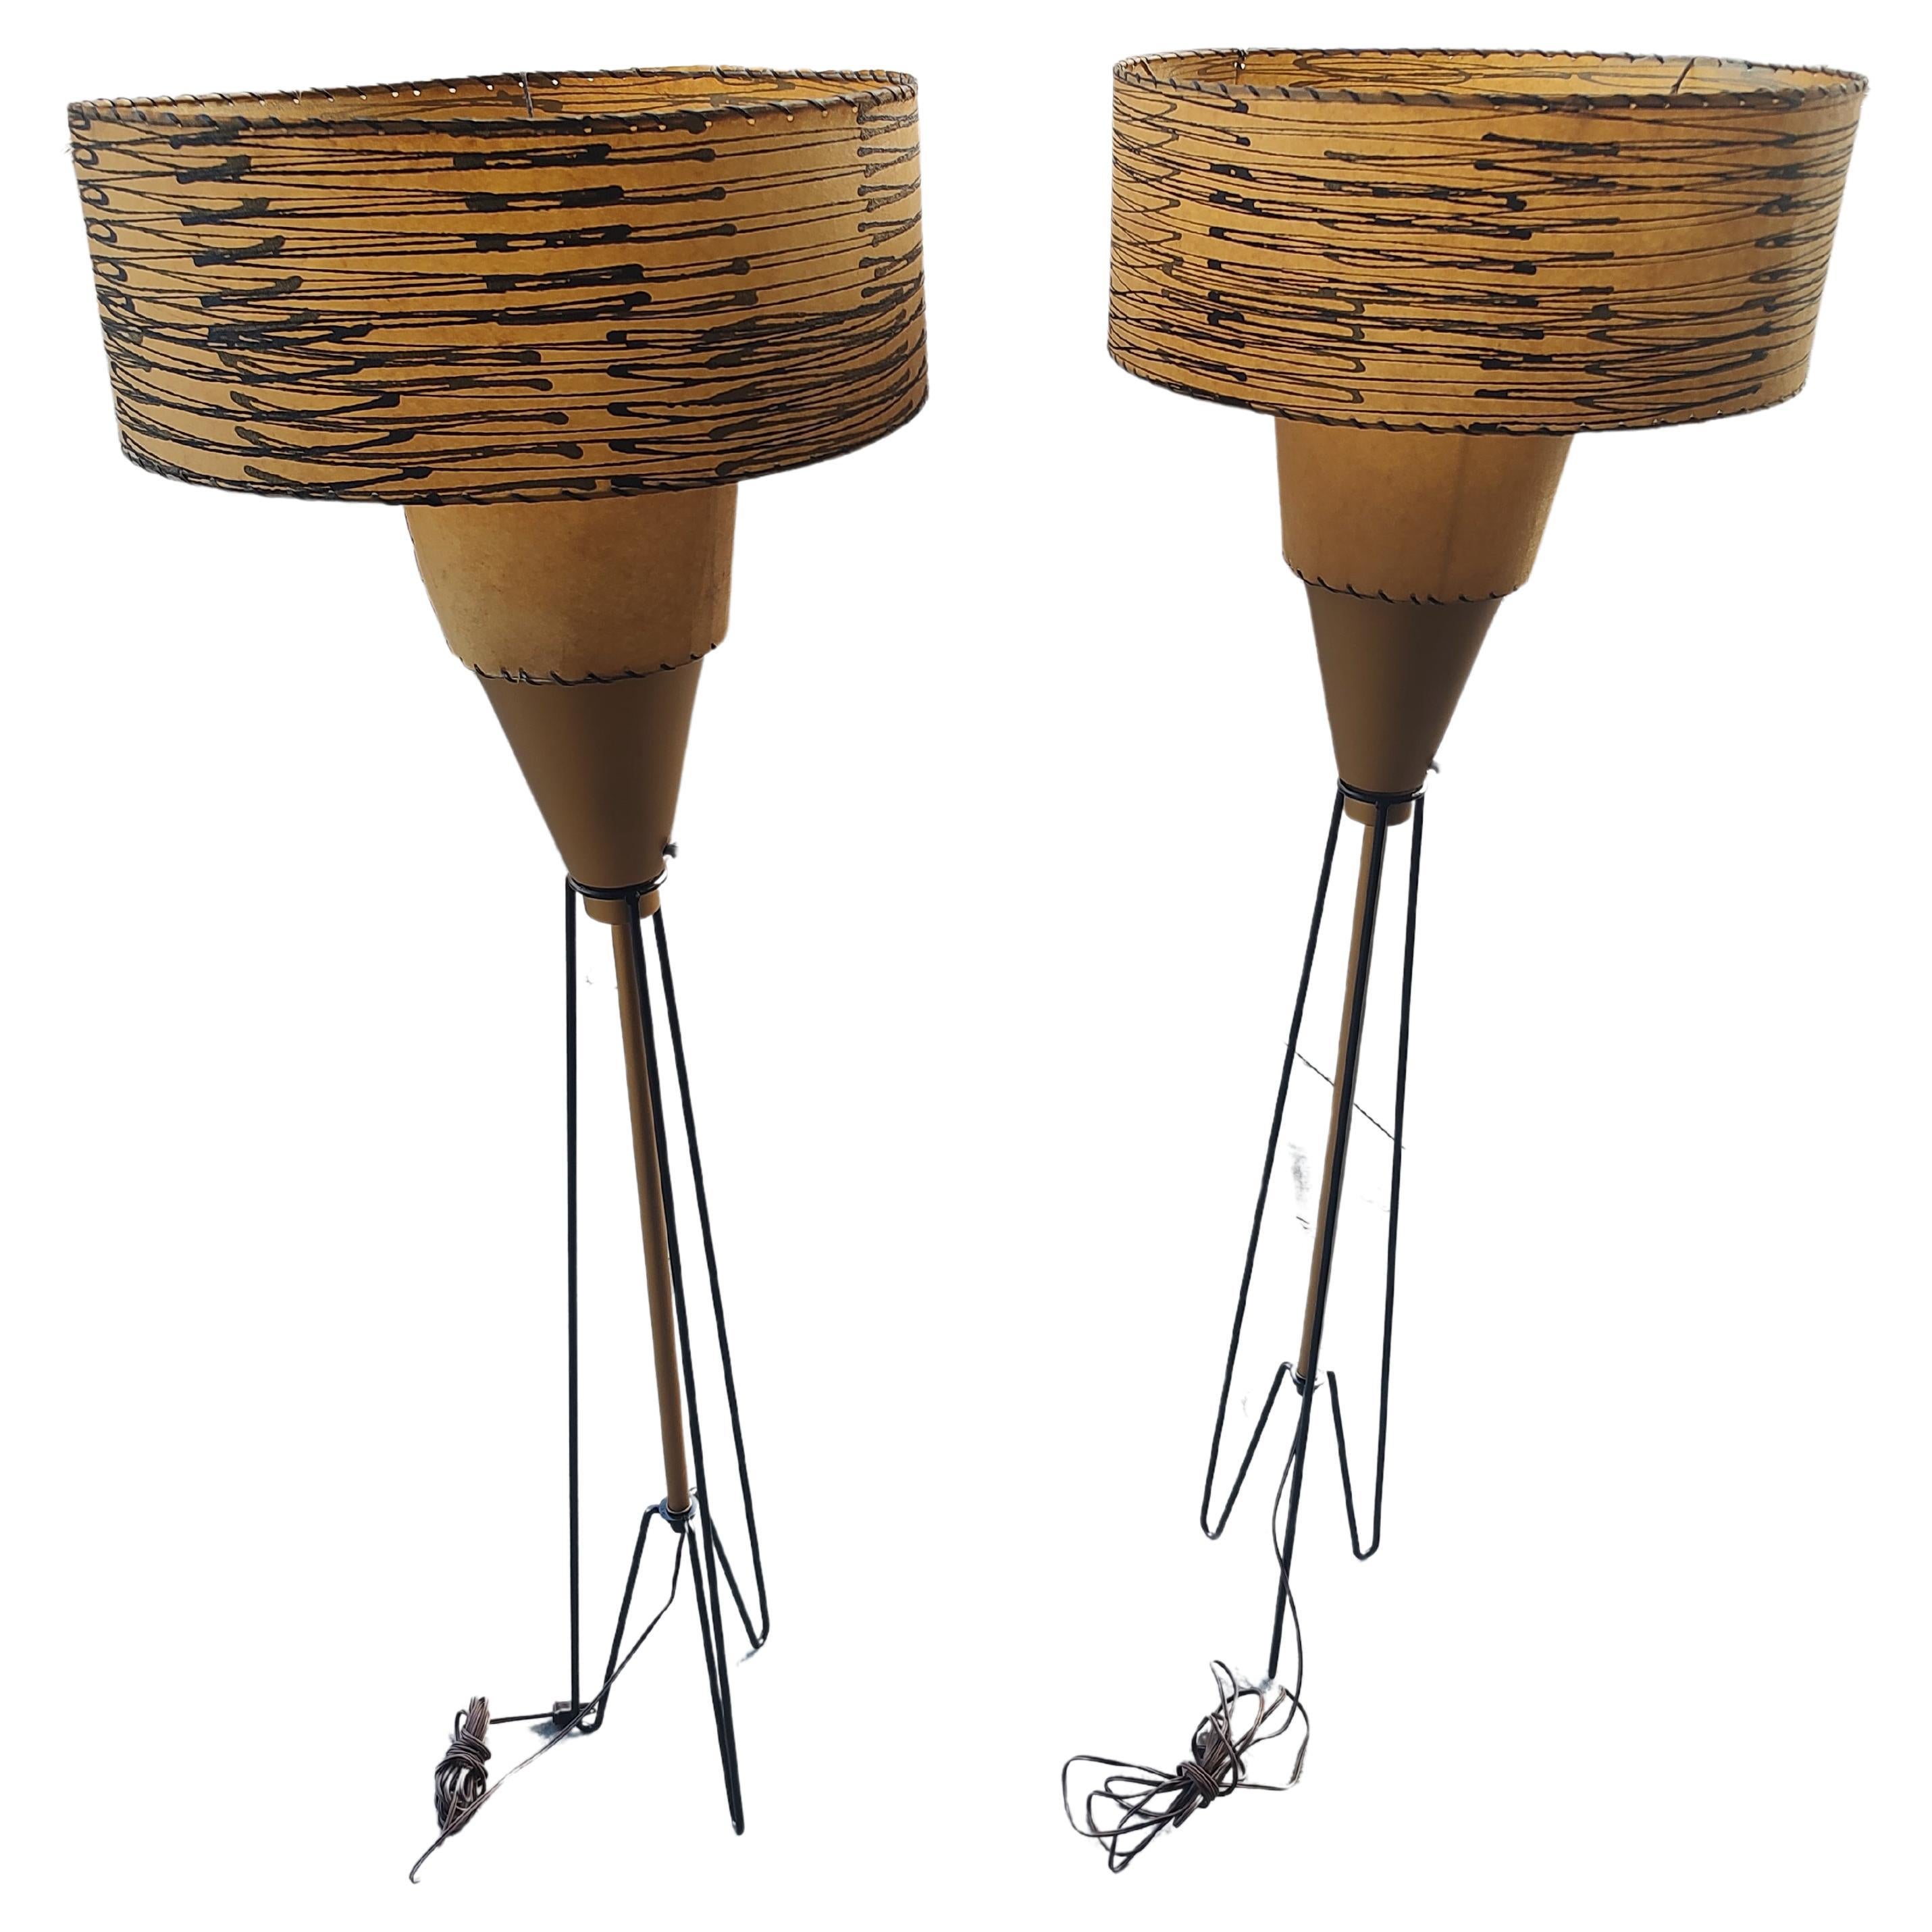 Pair of Mid Century Modern C1950s Floor Lamps Atomic Towers by Majestic Lamp Co. For Sale